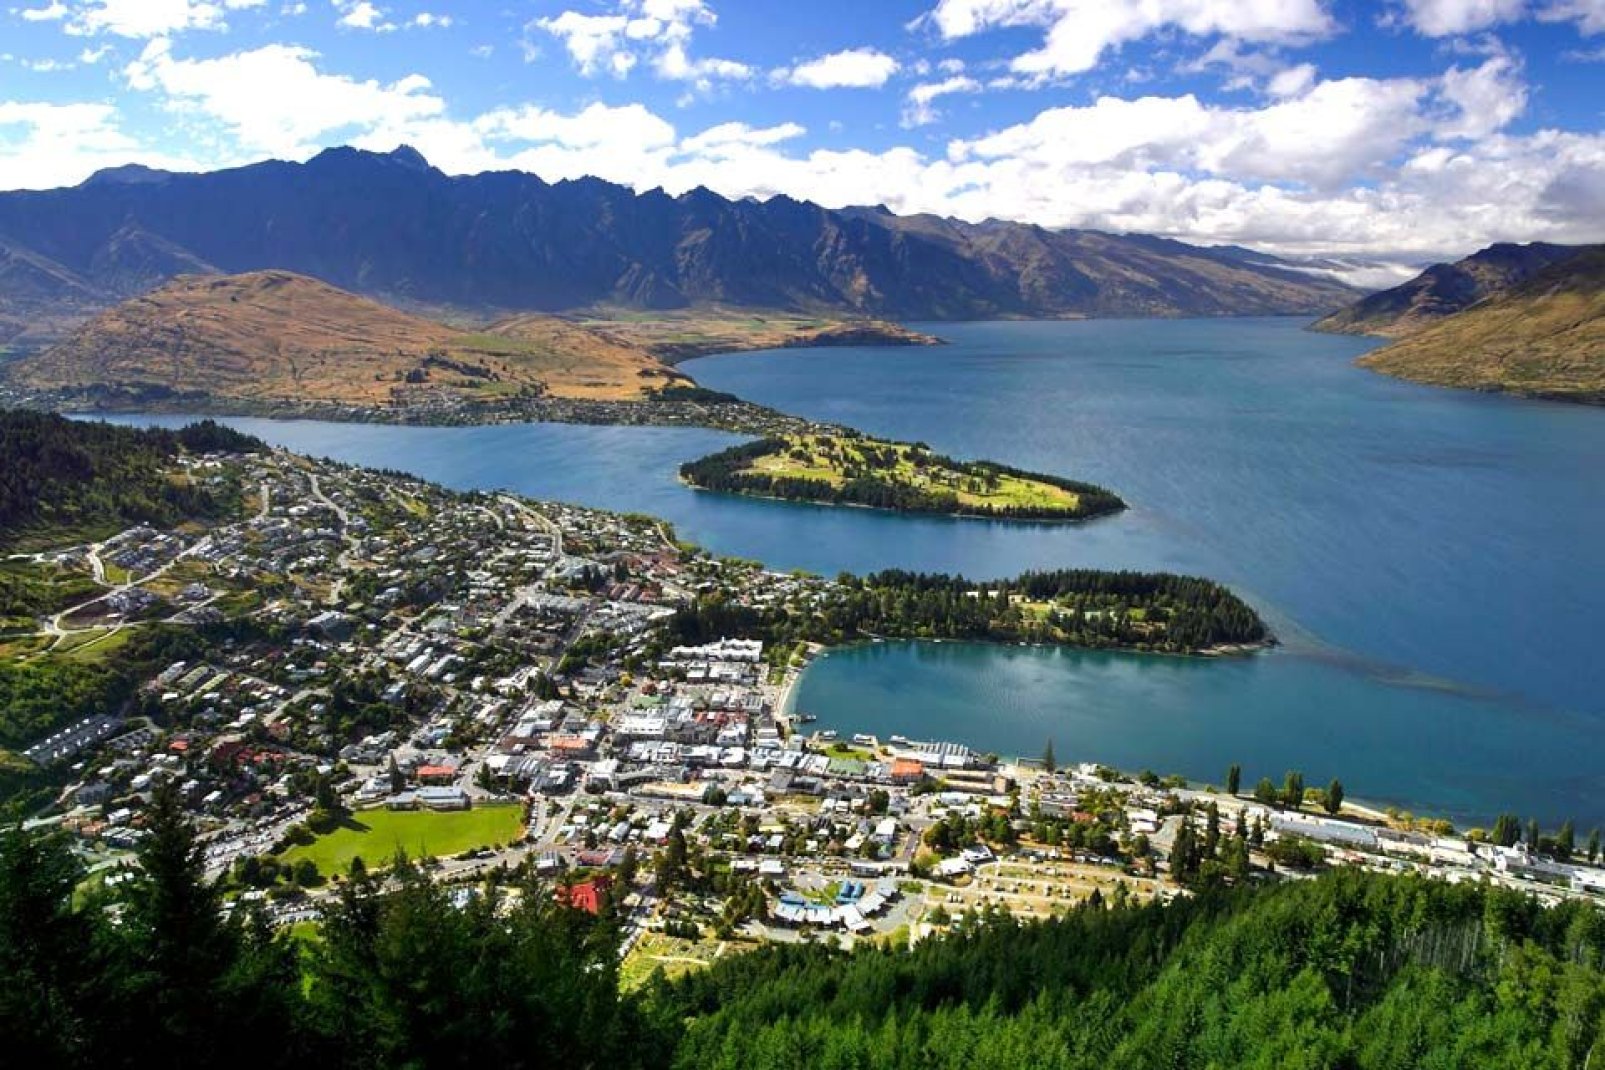 New Zealanders, who are very fond of sport, come to Queenstown to get their thrills. It is the best spot for skiing on the island and there are plenty of thrilling activities to do in summer.